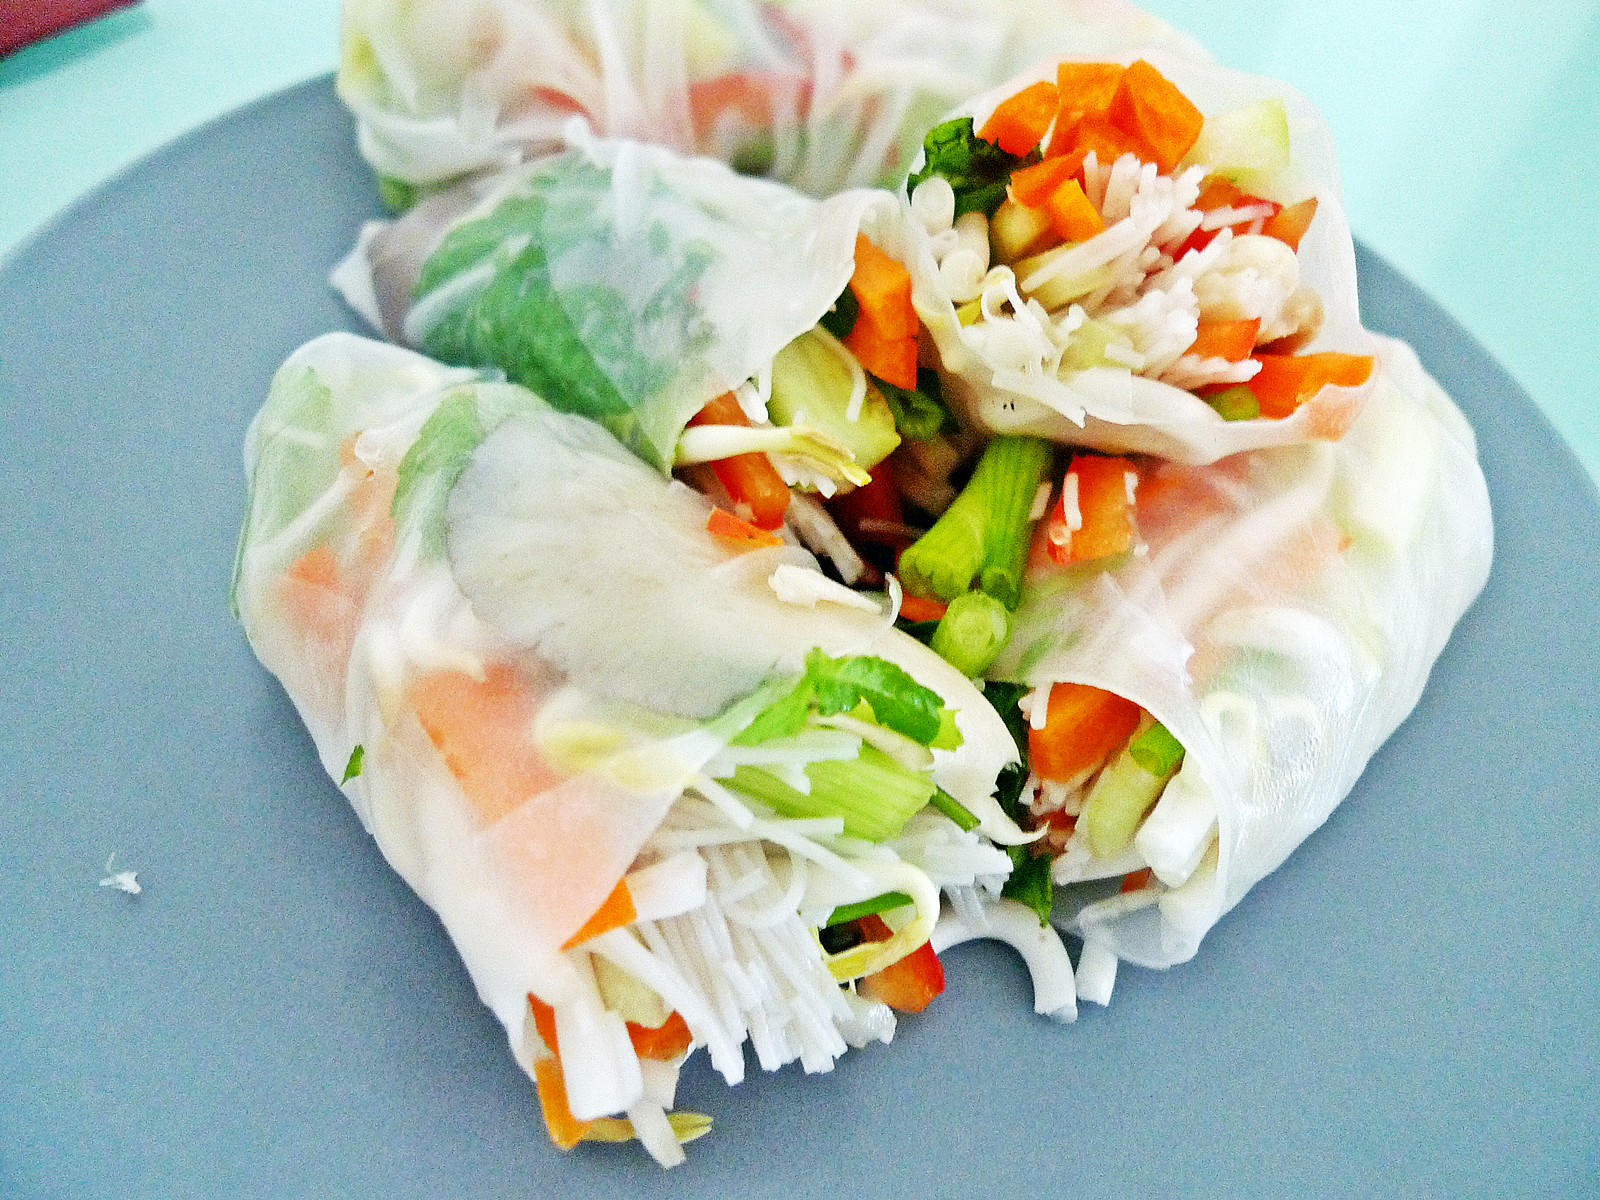 Free From The Three Vietnamese Style Rice Paper Rolls